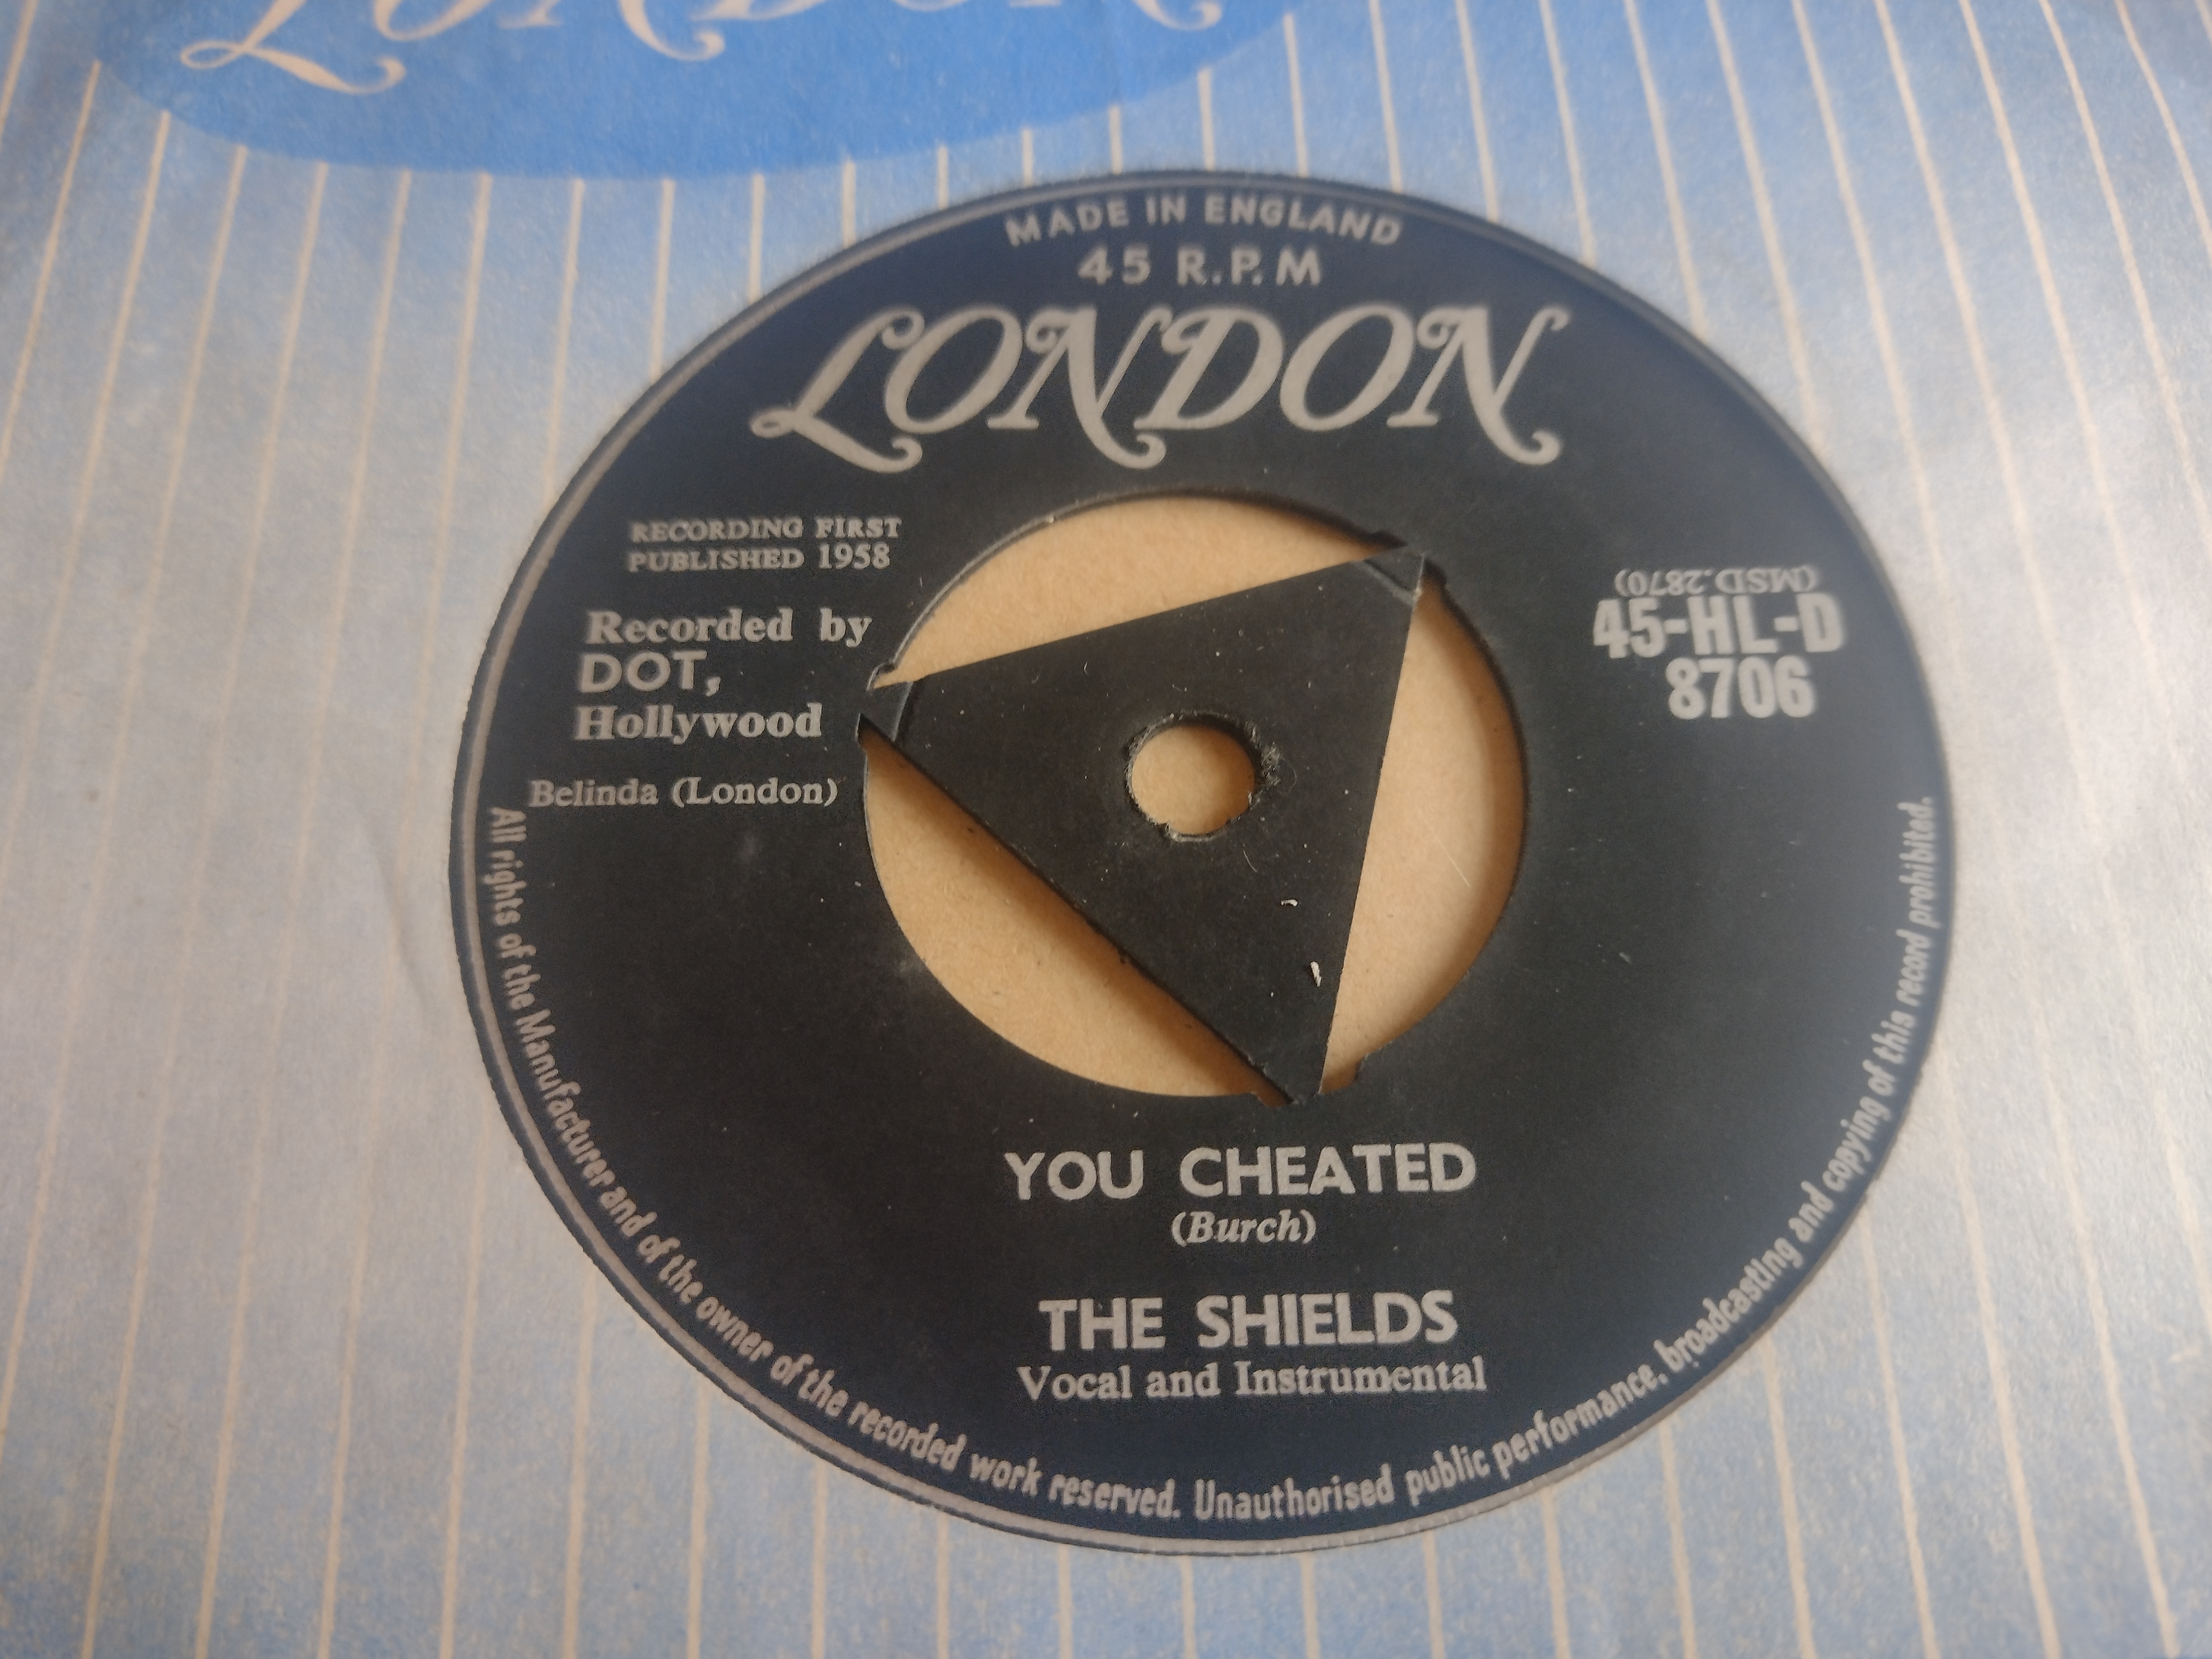 MUSIC 45 RPM RECORD - THE SHIELDS YOU CHEATED & THAT'S THE WAY IT'S GONNA BE